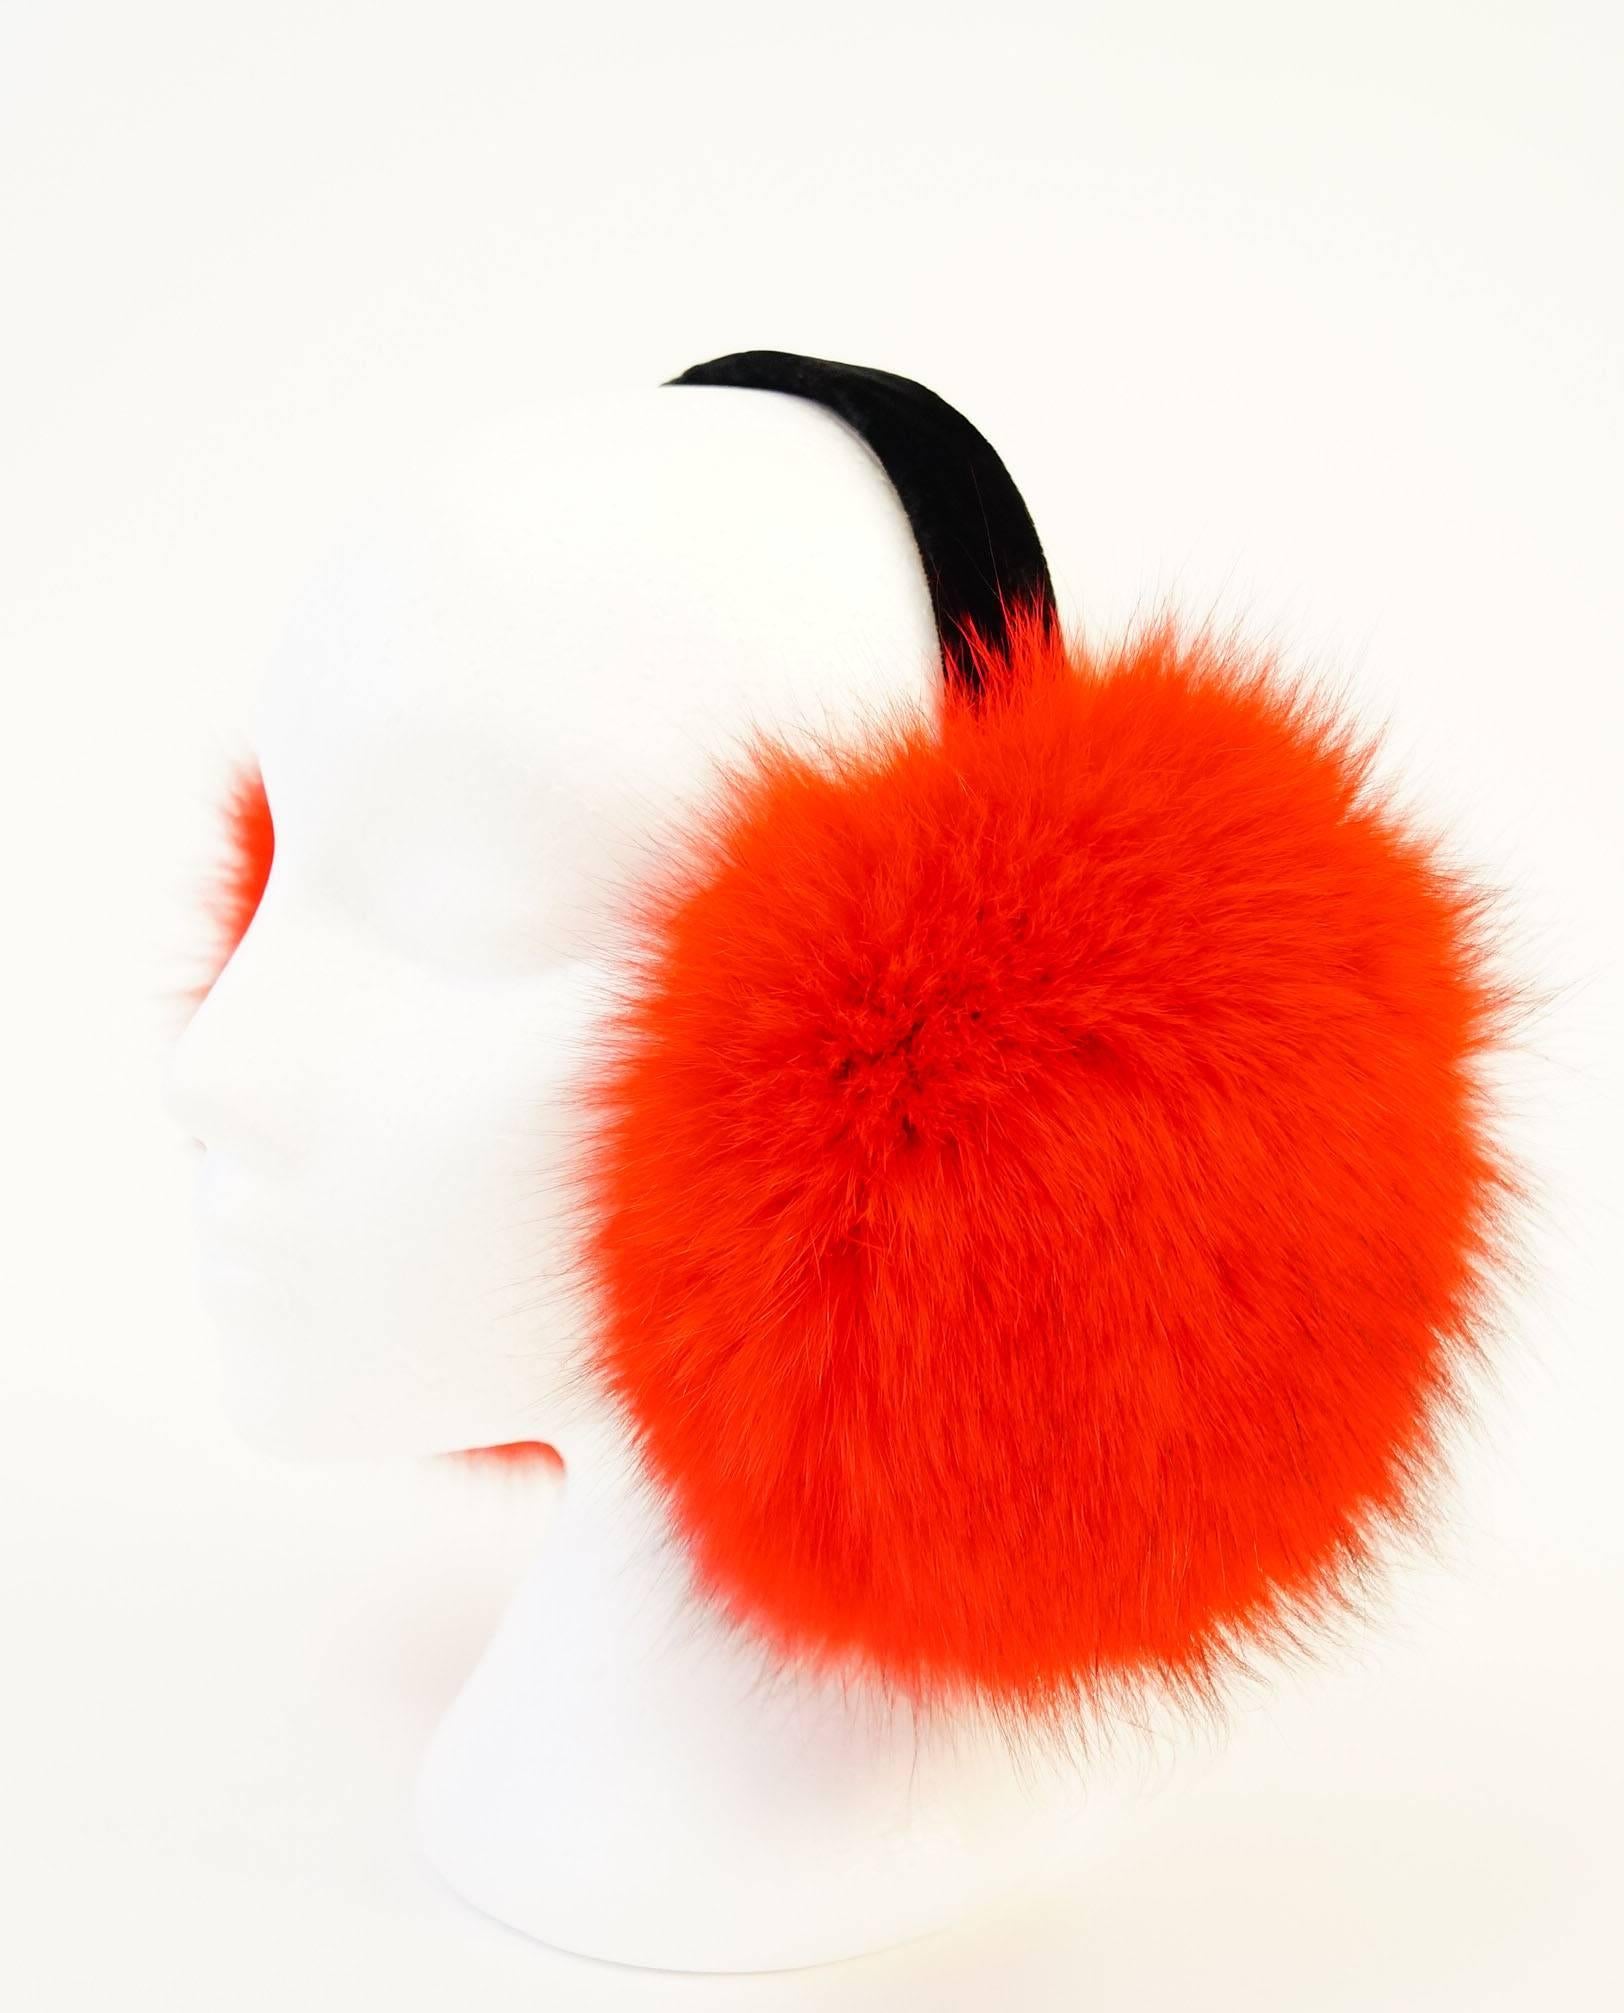 
Luxurious custom made red dyed fox earmuffs for a New York socialite can be owned by anyone in any city.  These earmuffs feature sumptuous red-dyed fox fur on the outer side of a soft black velvet pad, held together by a black velvet headband. The